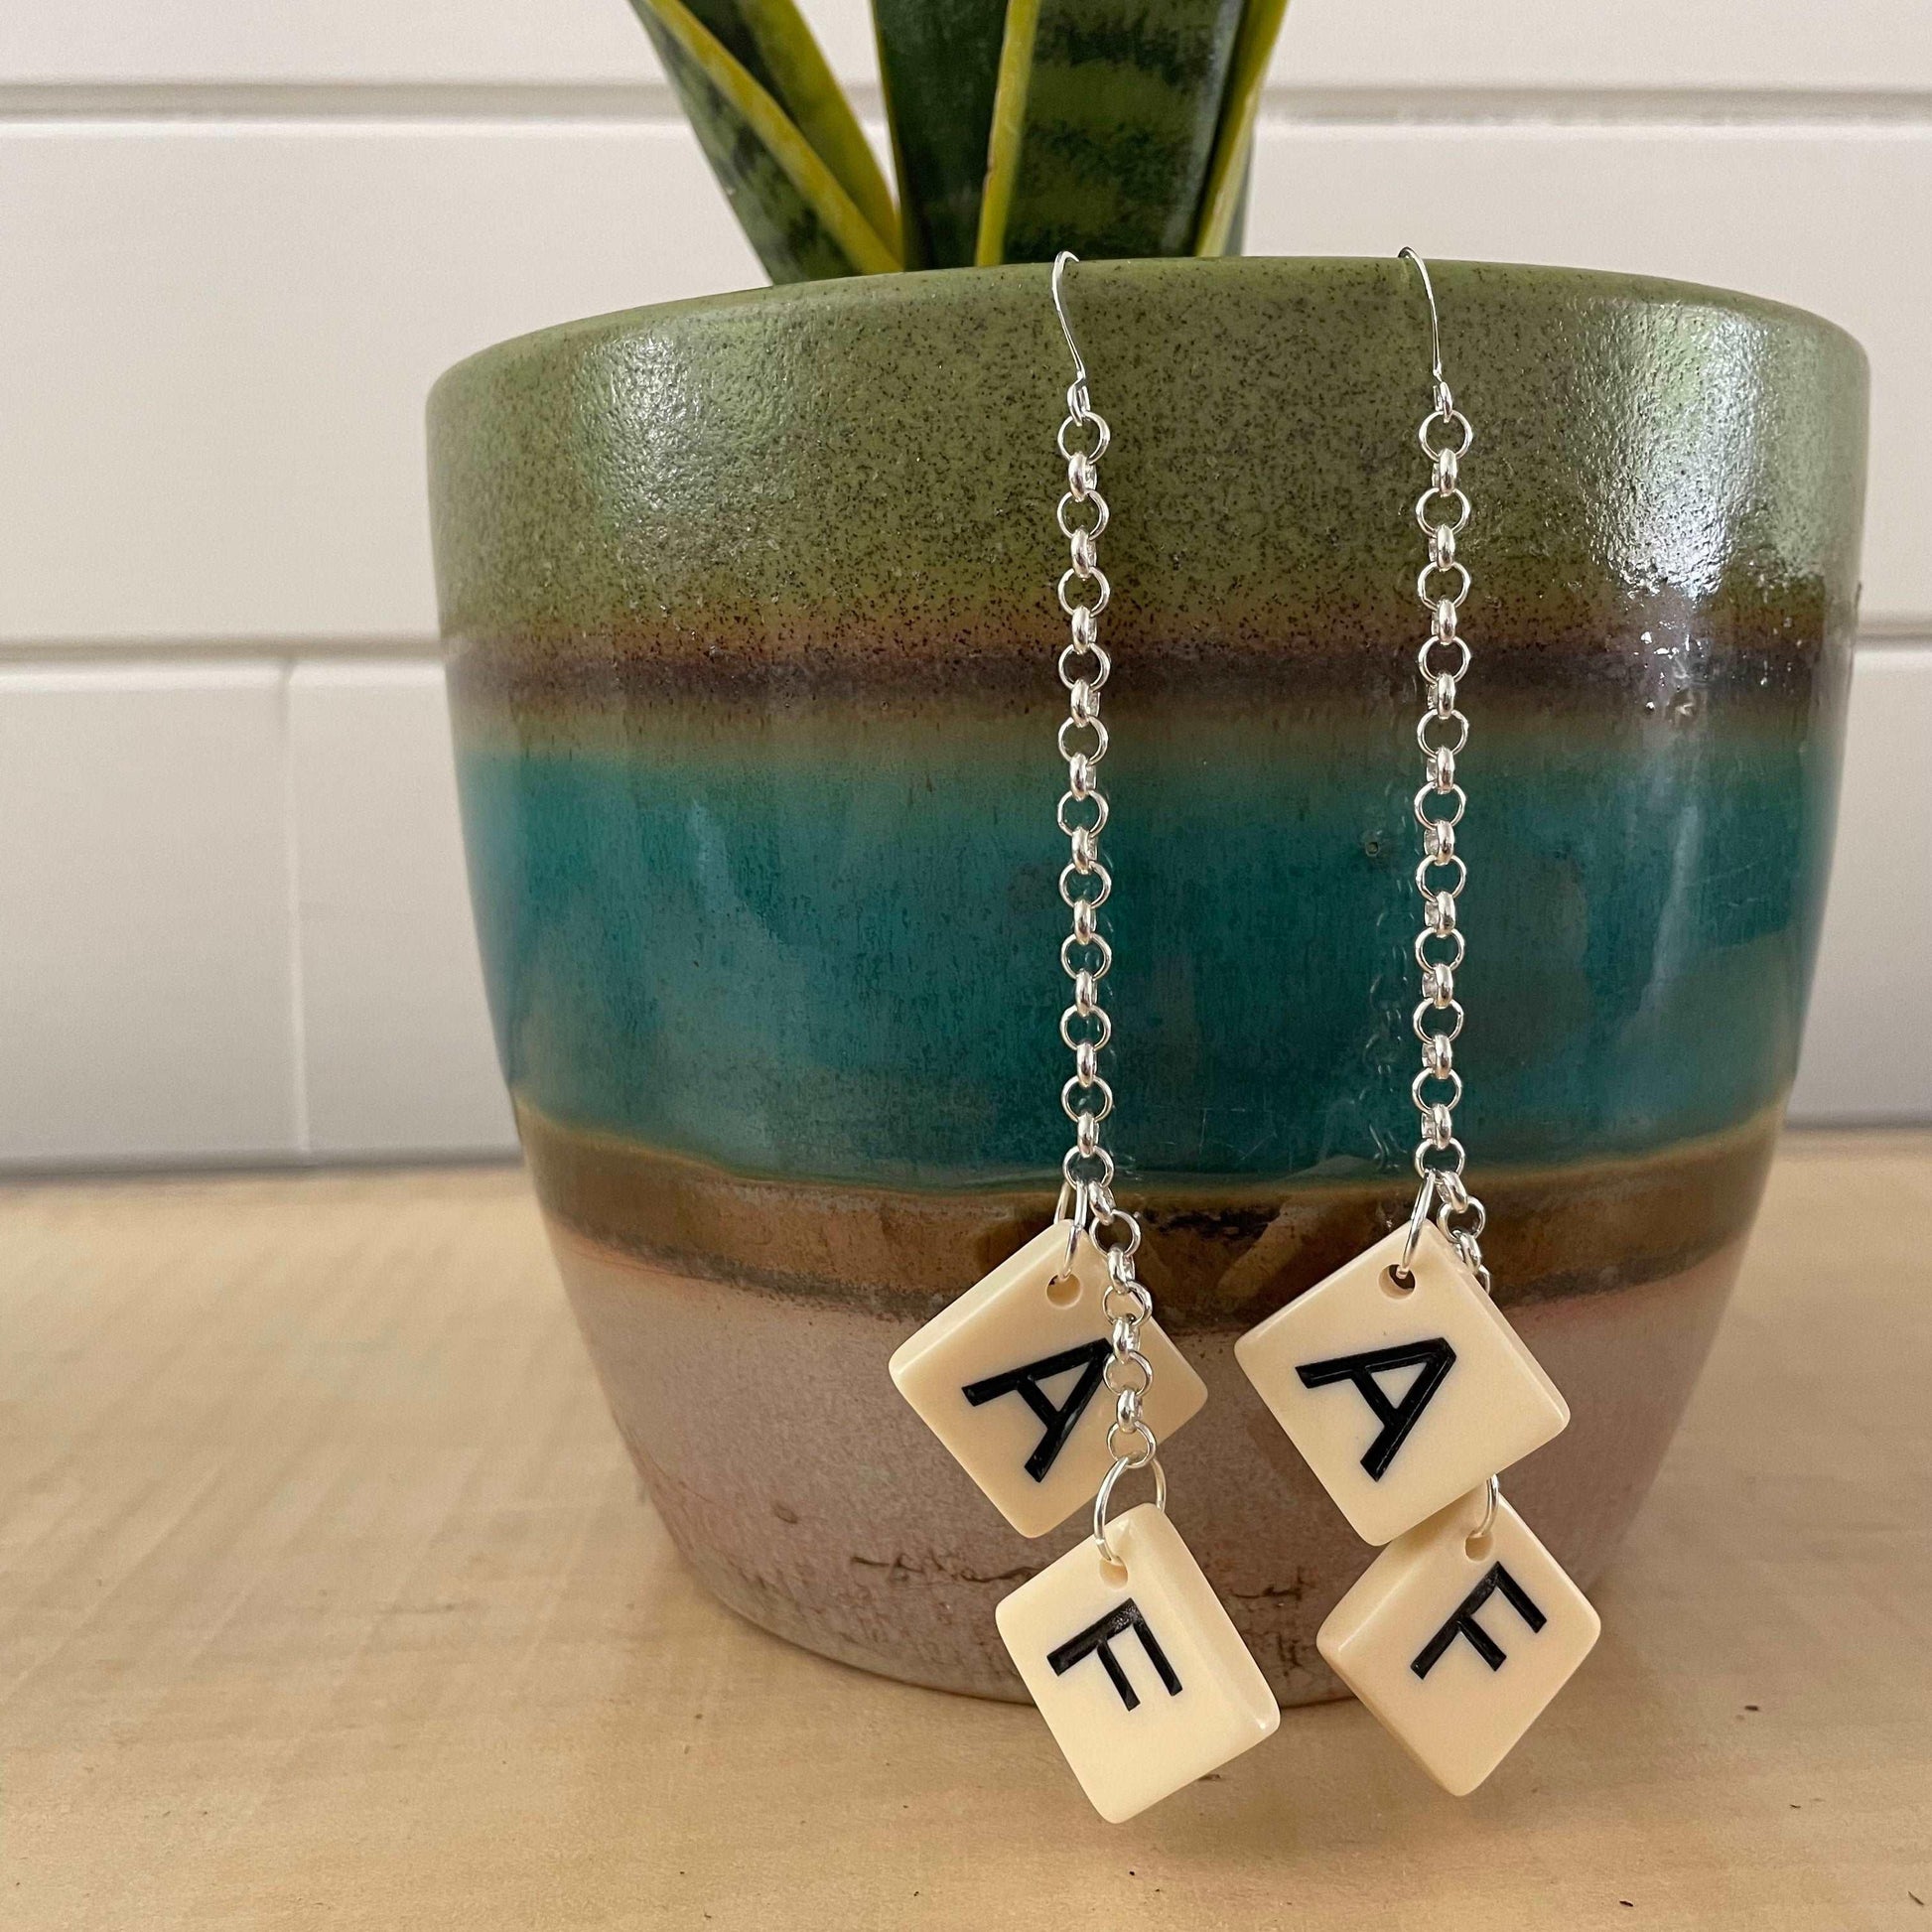 AF Long Statement Earrings 4.75" Letter Game Tile Cream Resin Repurposed Upcycled Fun Game OOAK